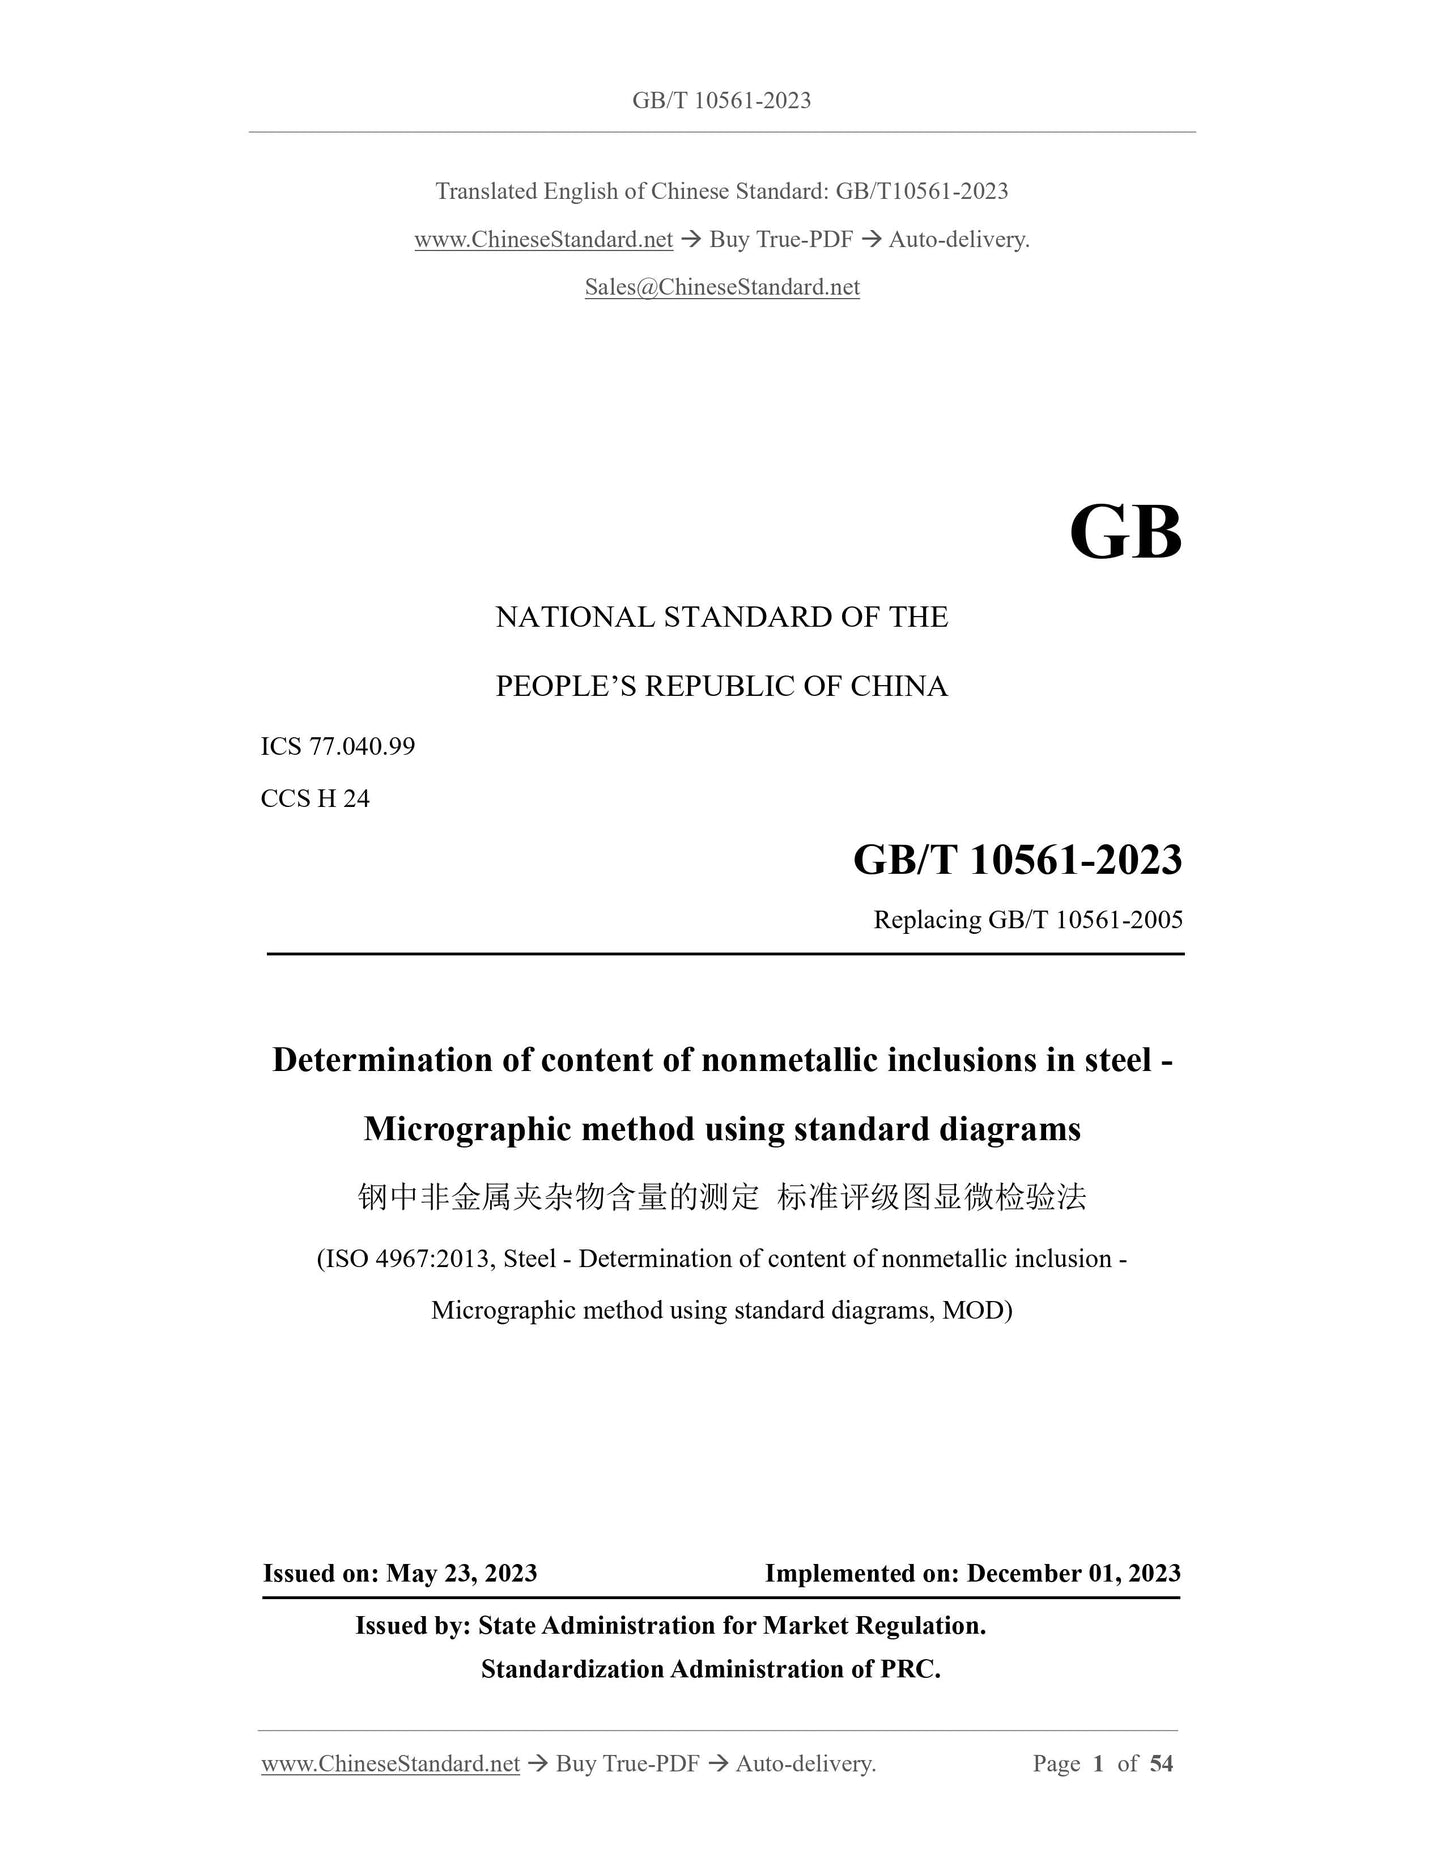 GB/T 10561-2023 Page 1